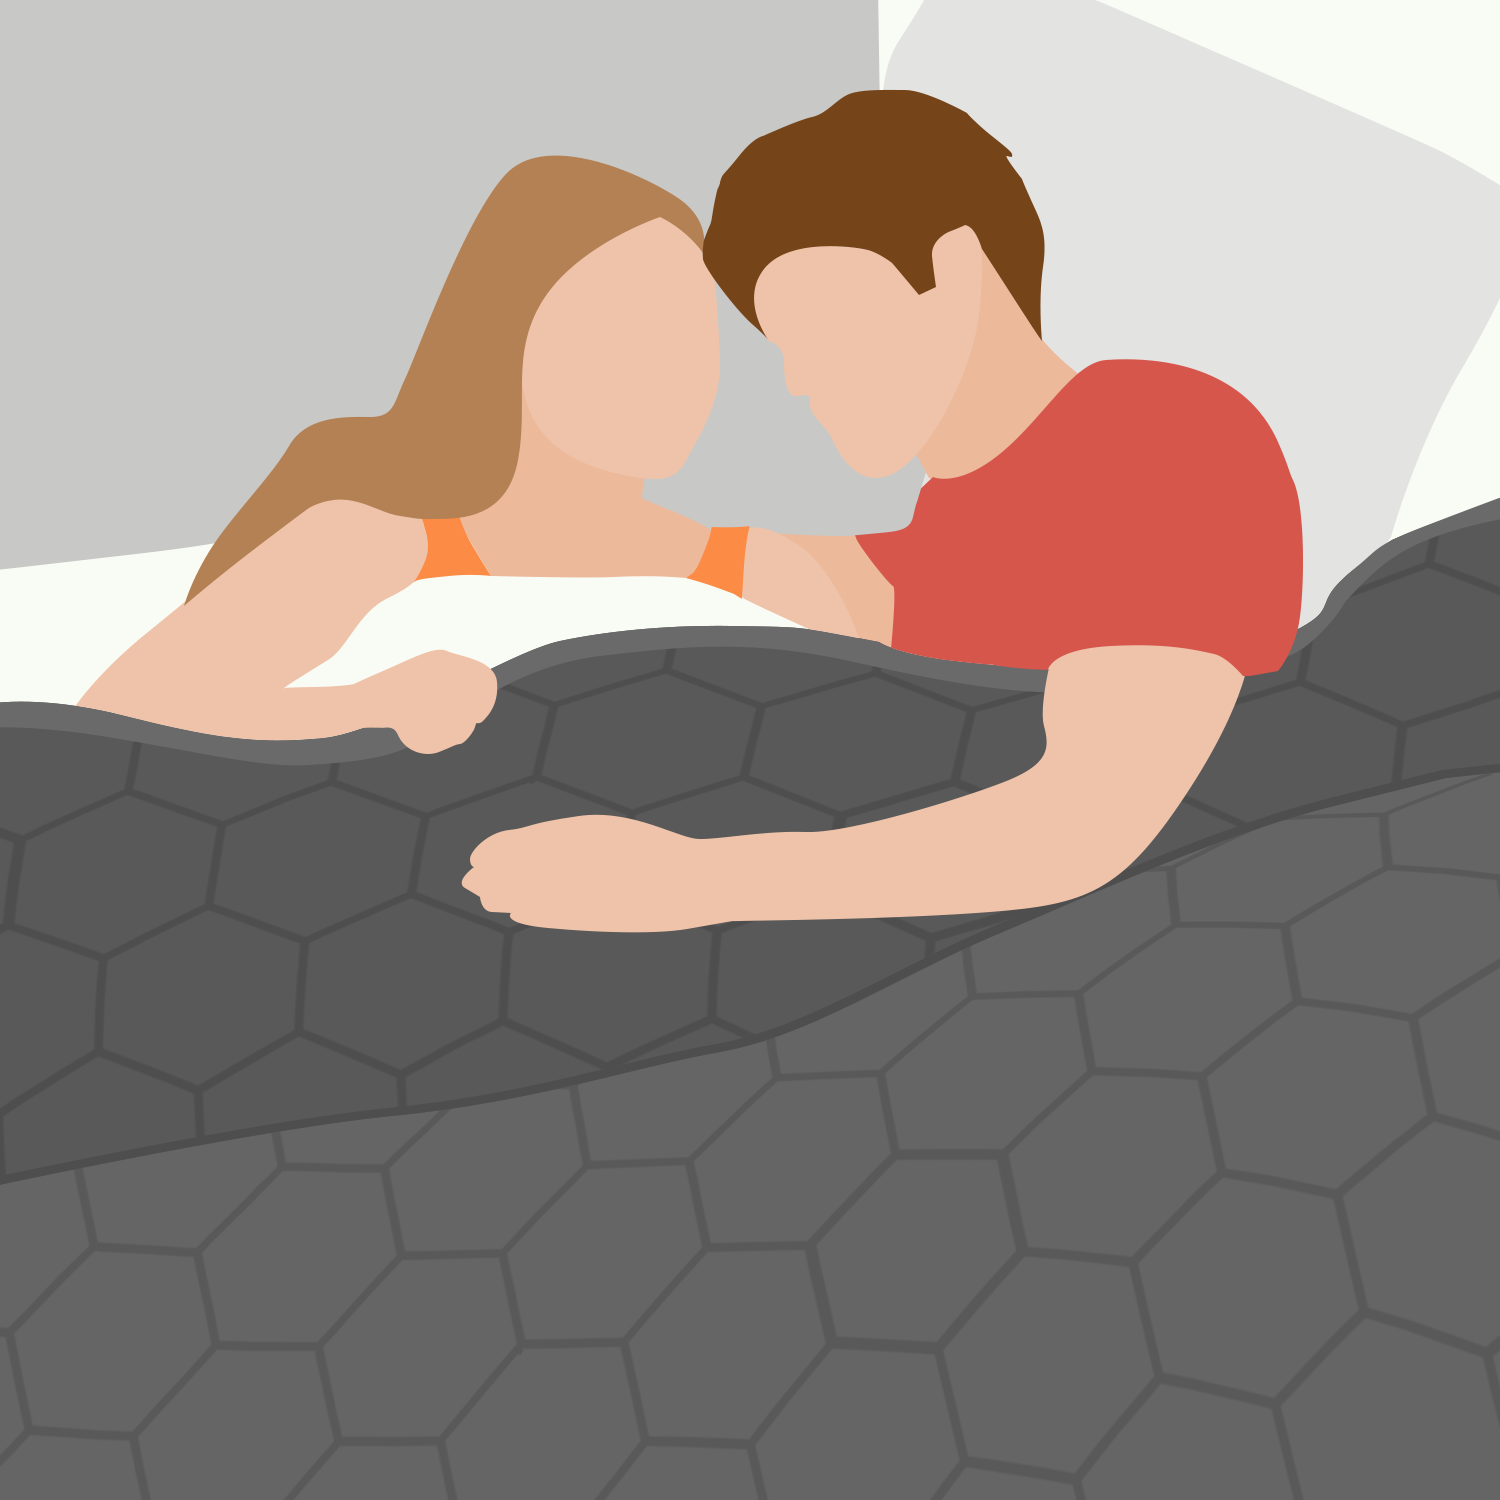 What Size Should a Weighted Blanket Be for a Couple?